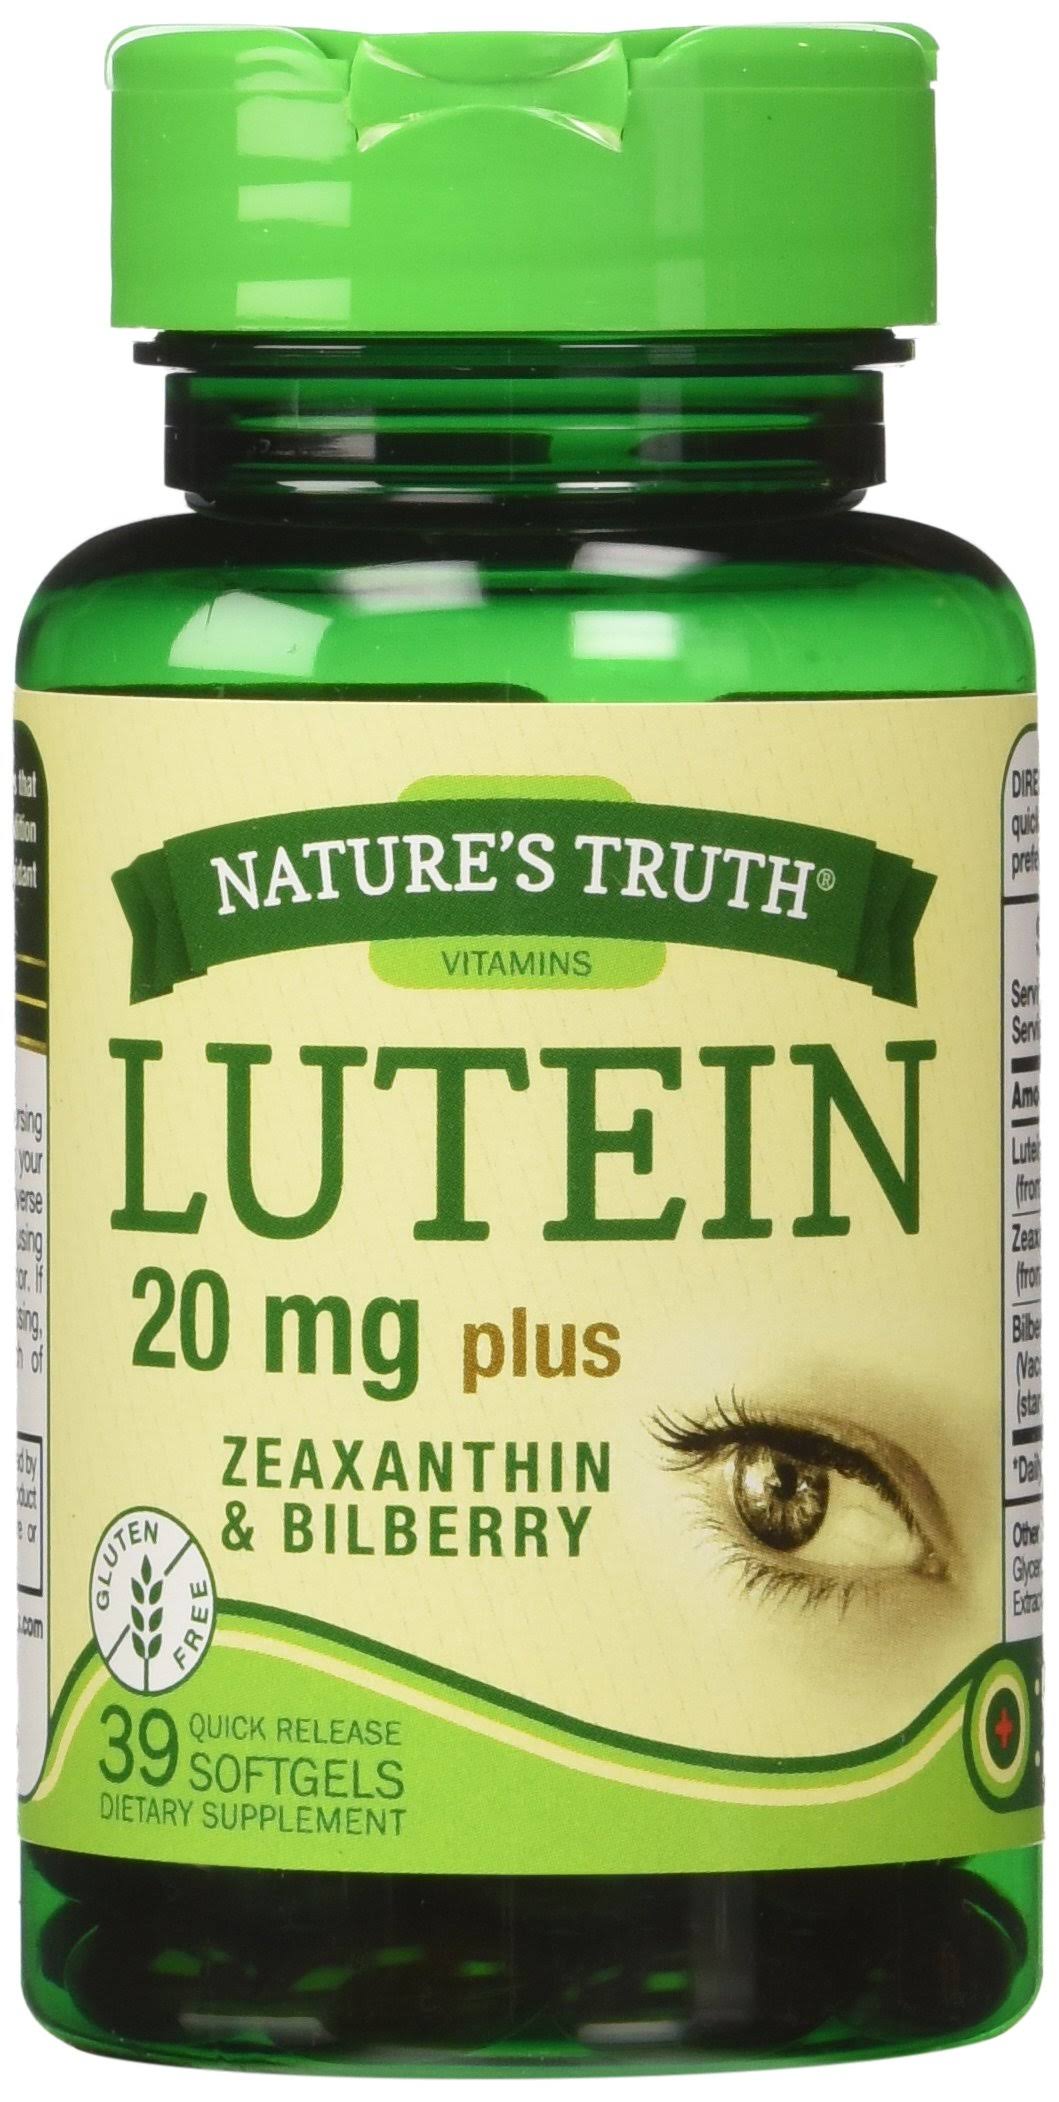 Nature's Truth Lutein Dietary Supplement - 20mg, 39 Softgels